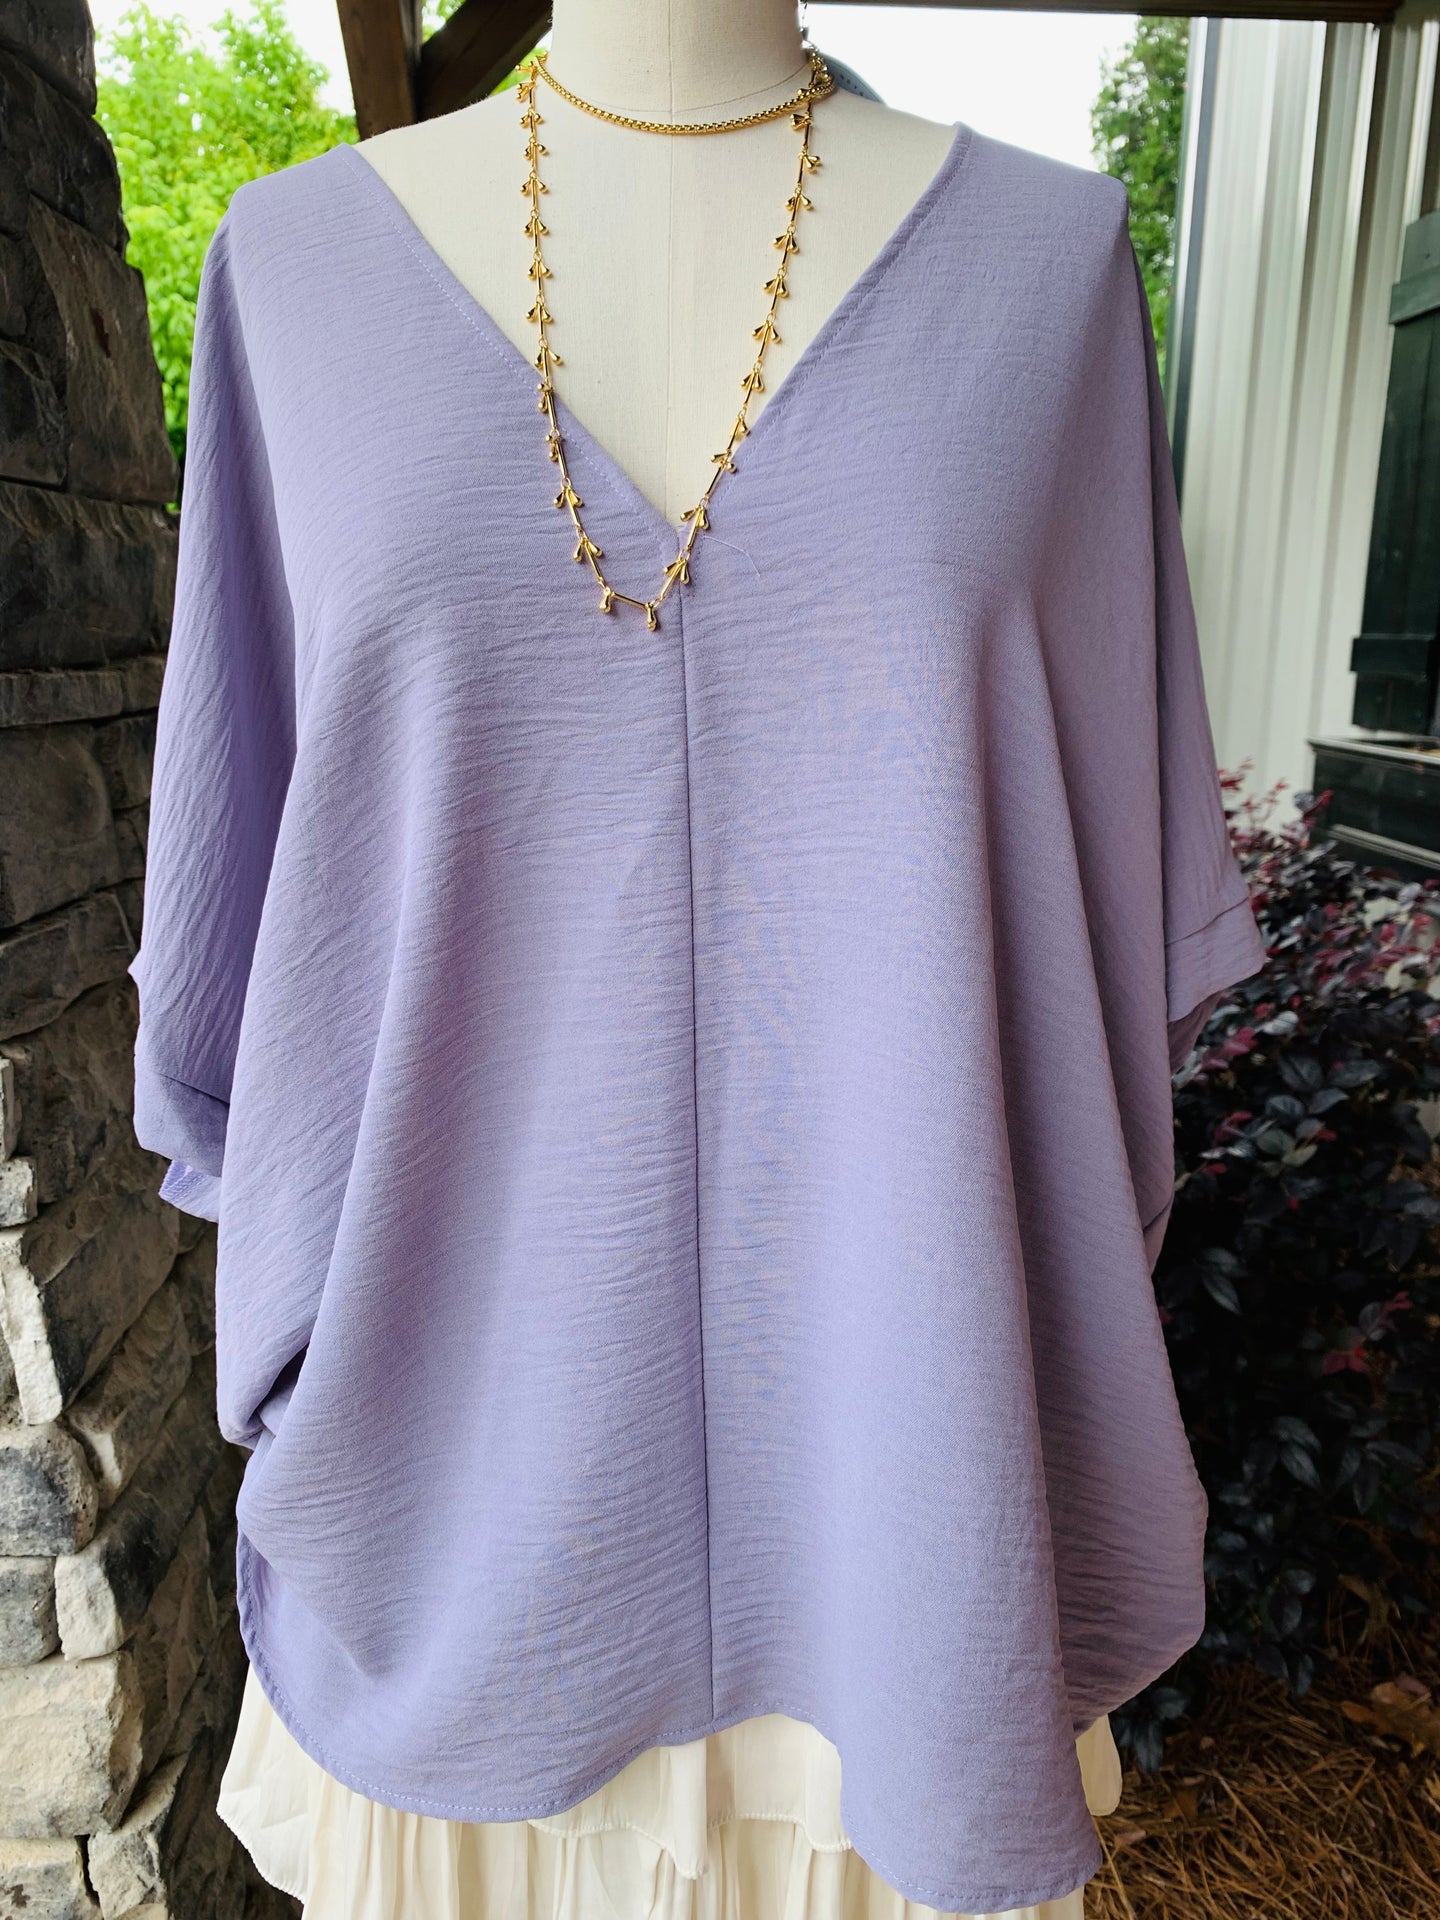 The Lilly Lavender Top